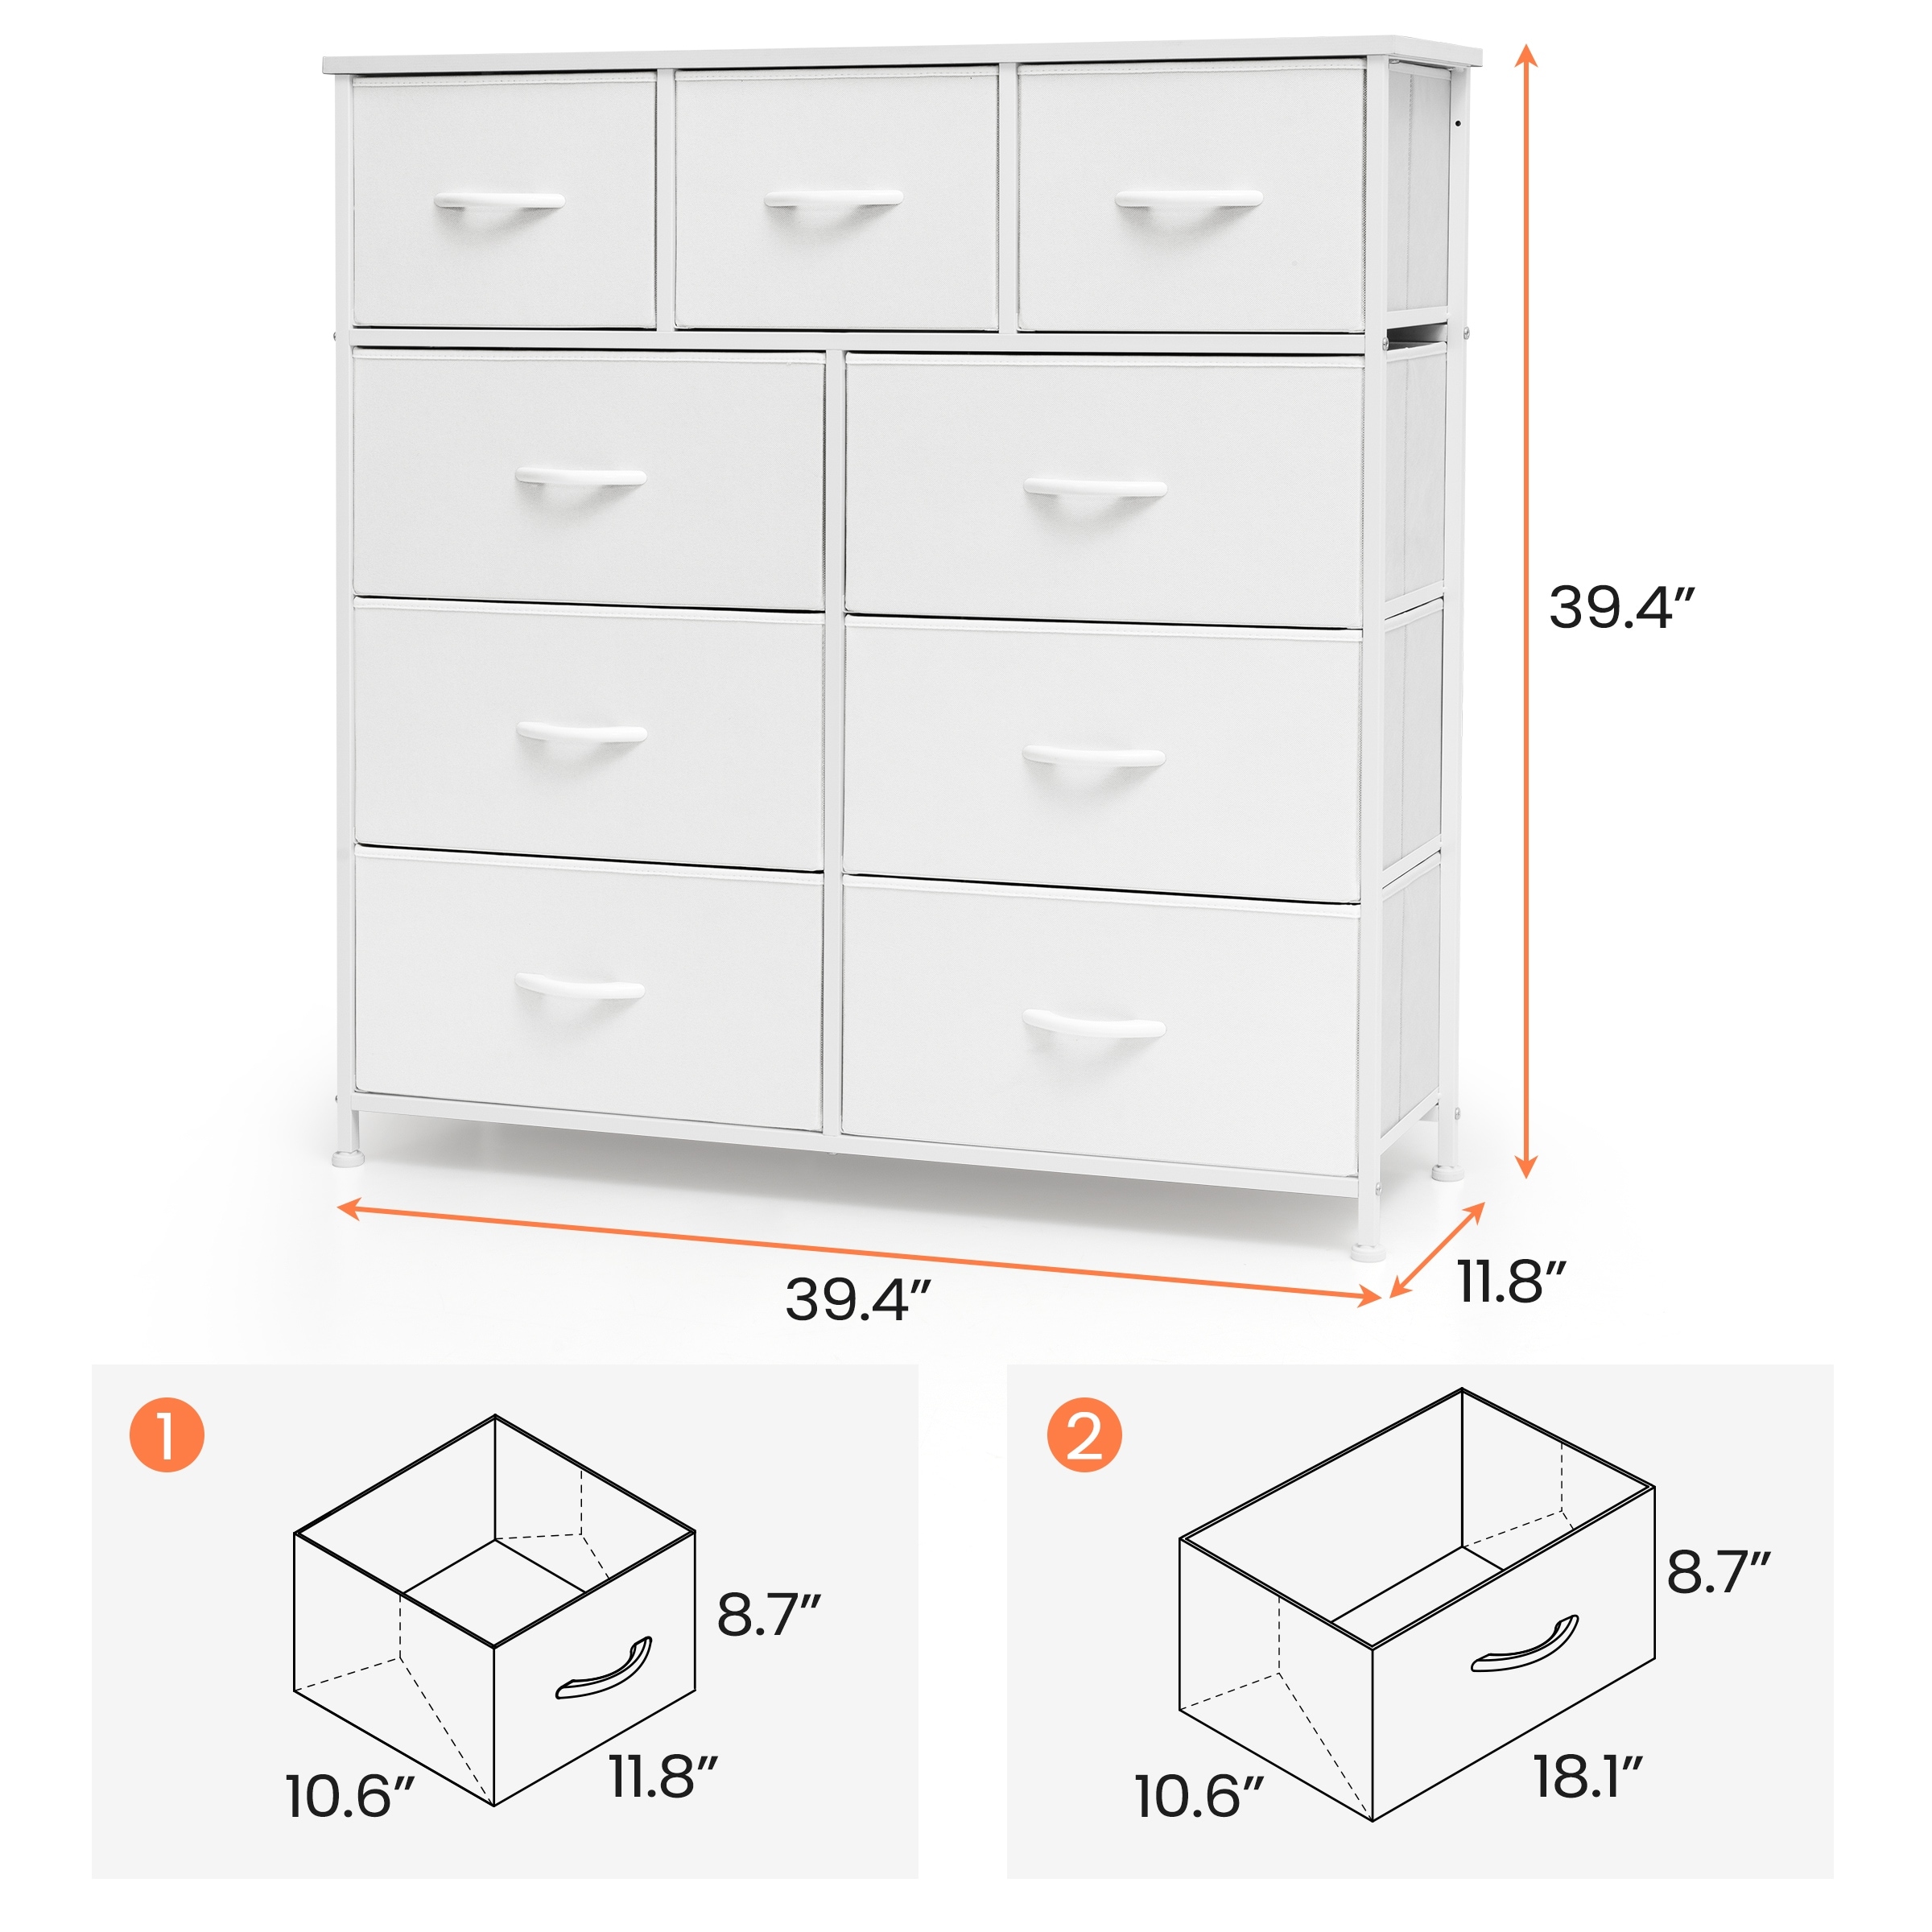 https://ak1.ostkcdn.com/images/products/is/images/direct/febaf93fb3c6b22bf9e97af6ea04b8e118f98b9f/VredHom-Extra-Wide-9-Drawers-Fabric-Dresser-Storage-Organizer.jpg